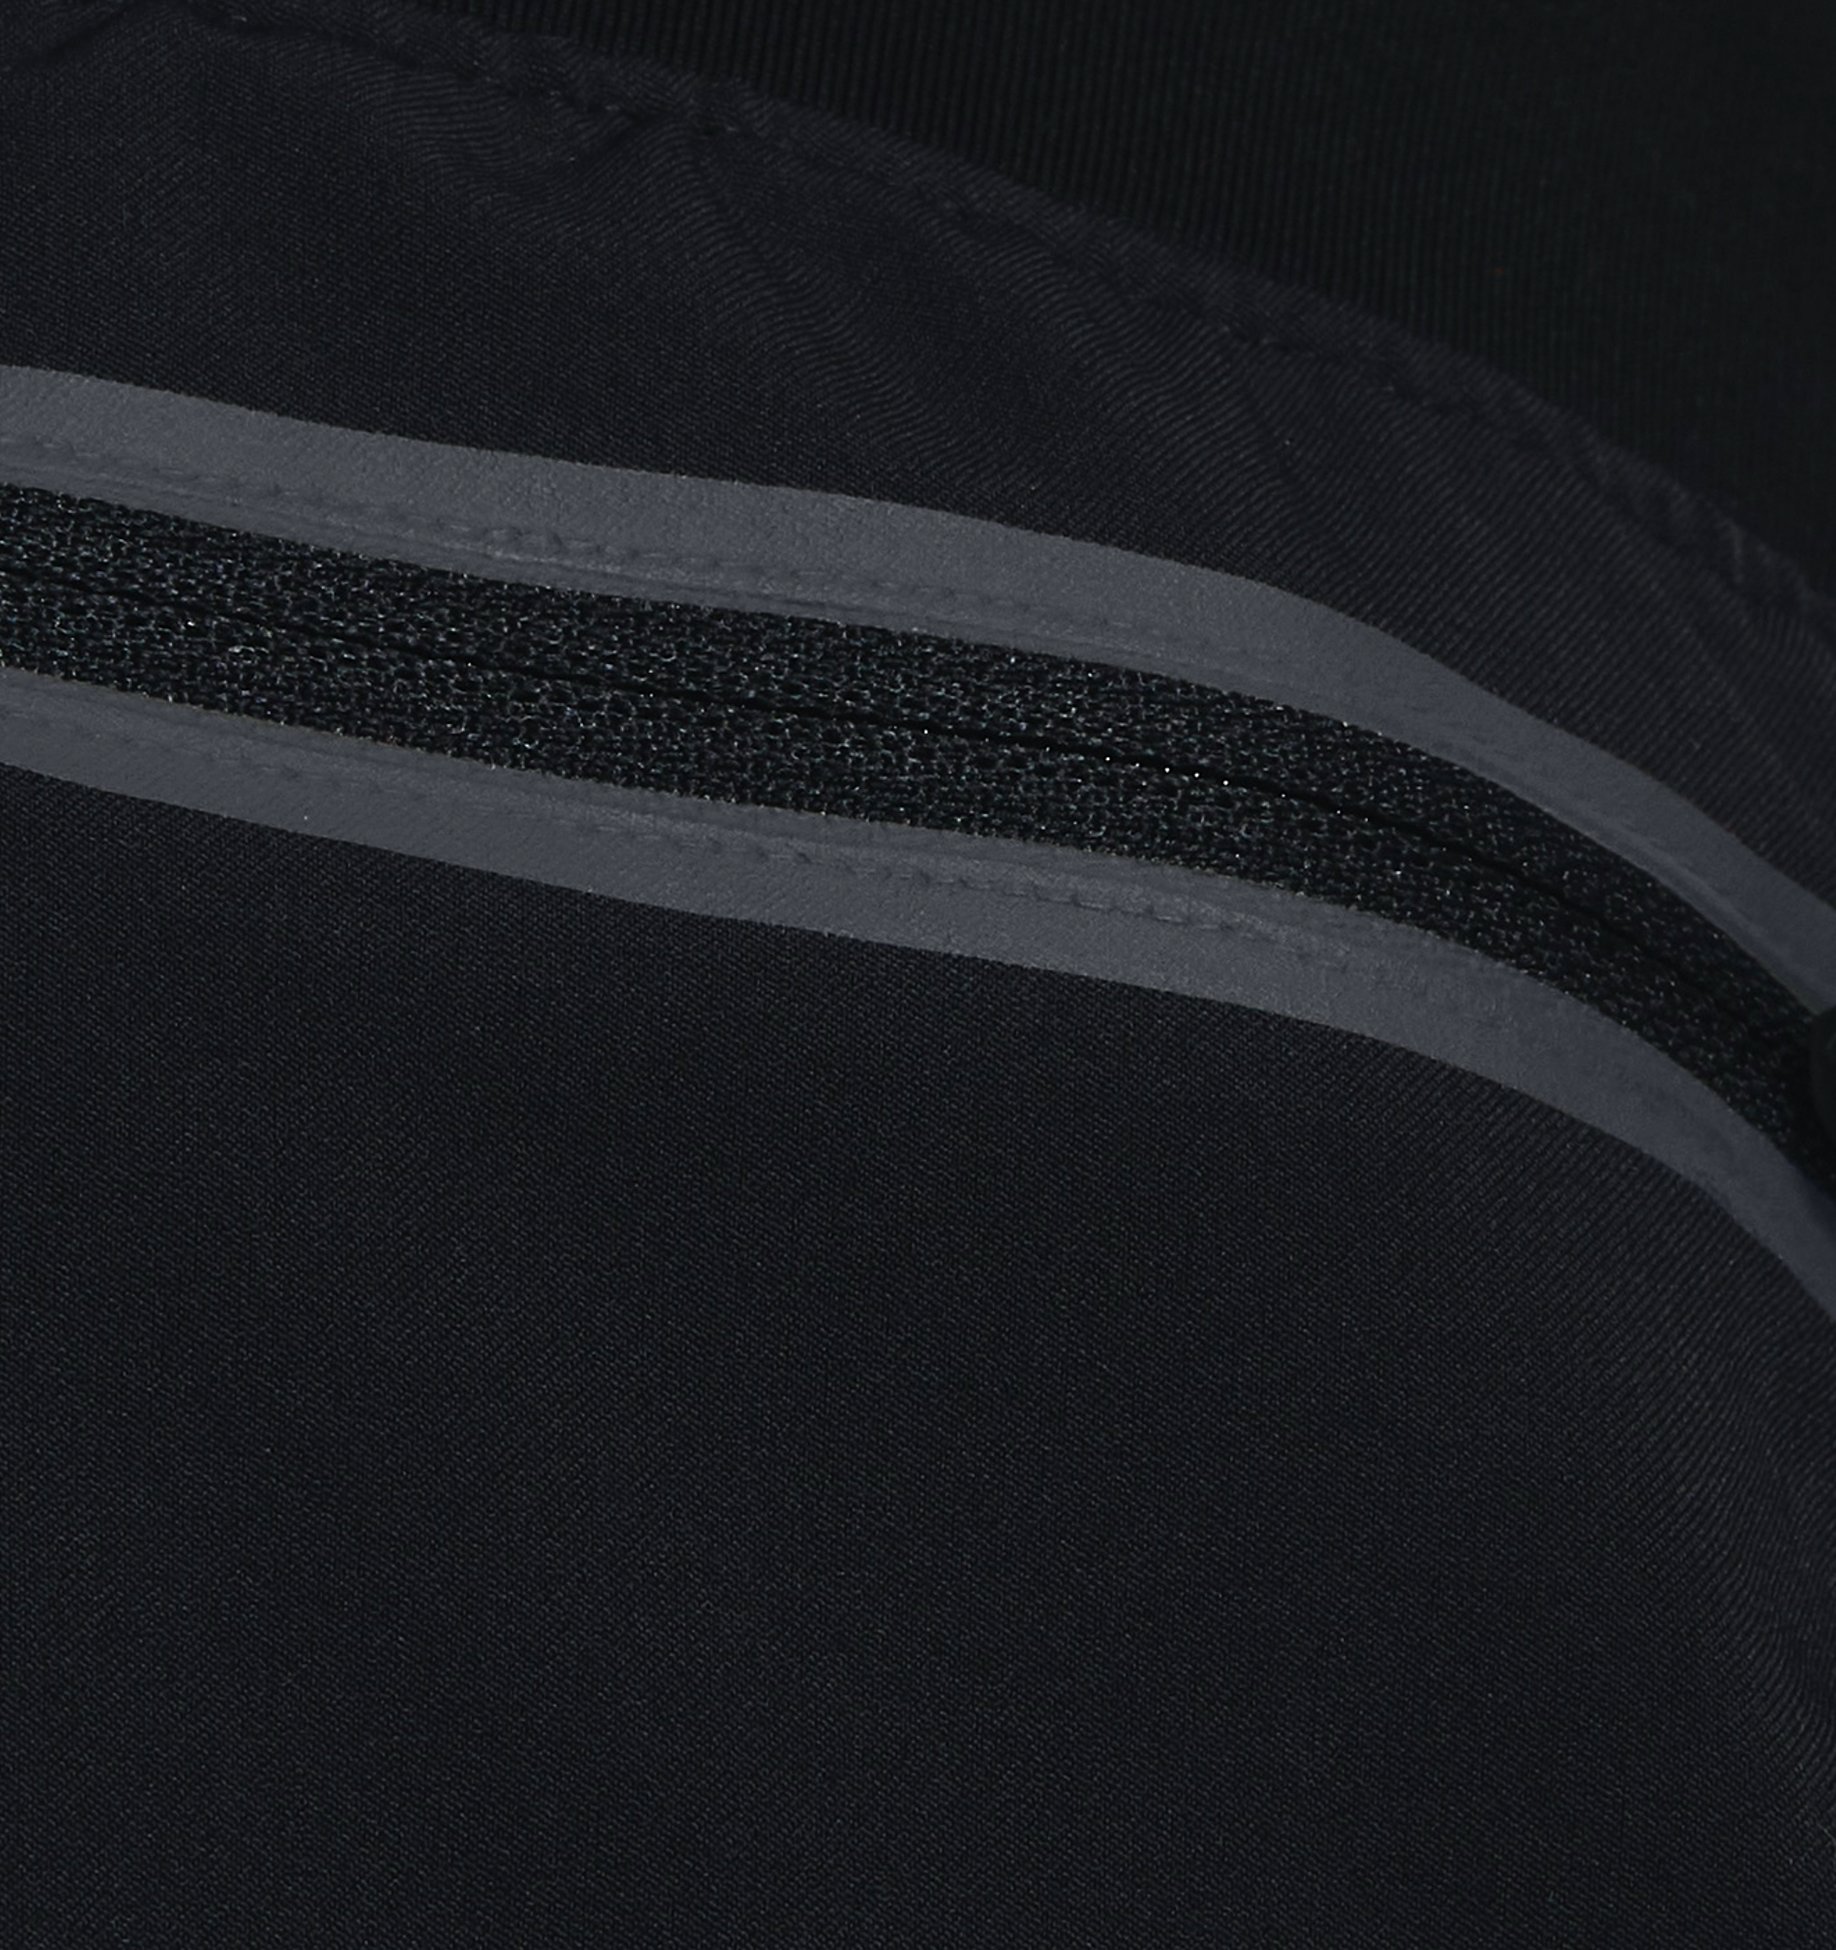 Under Armour UNSTOPPABLE TAPERED - Pantalón de chándal hombre gris